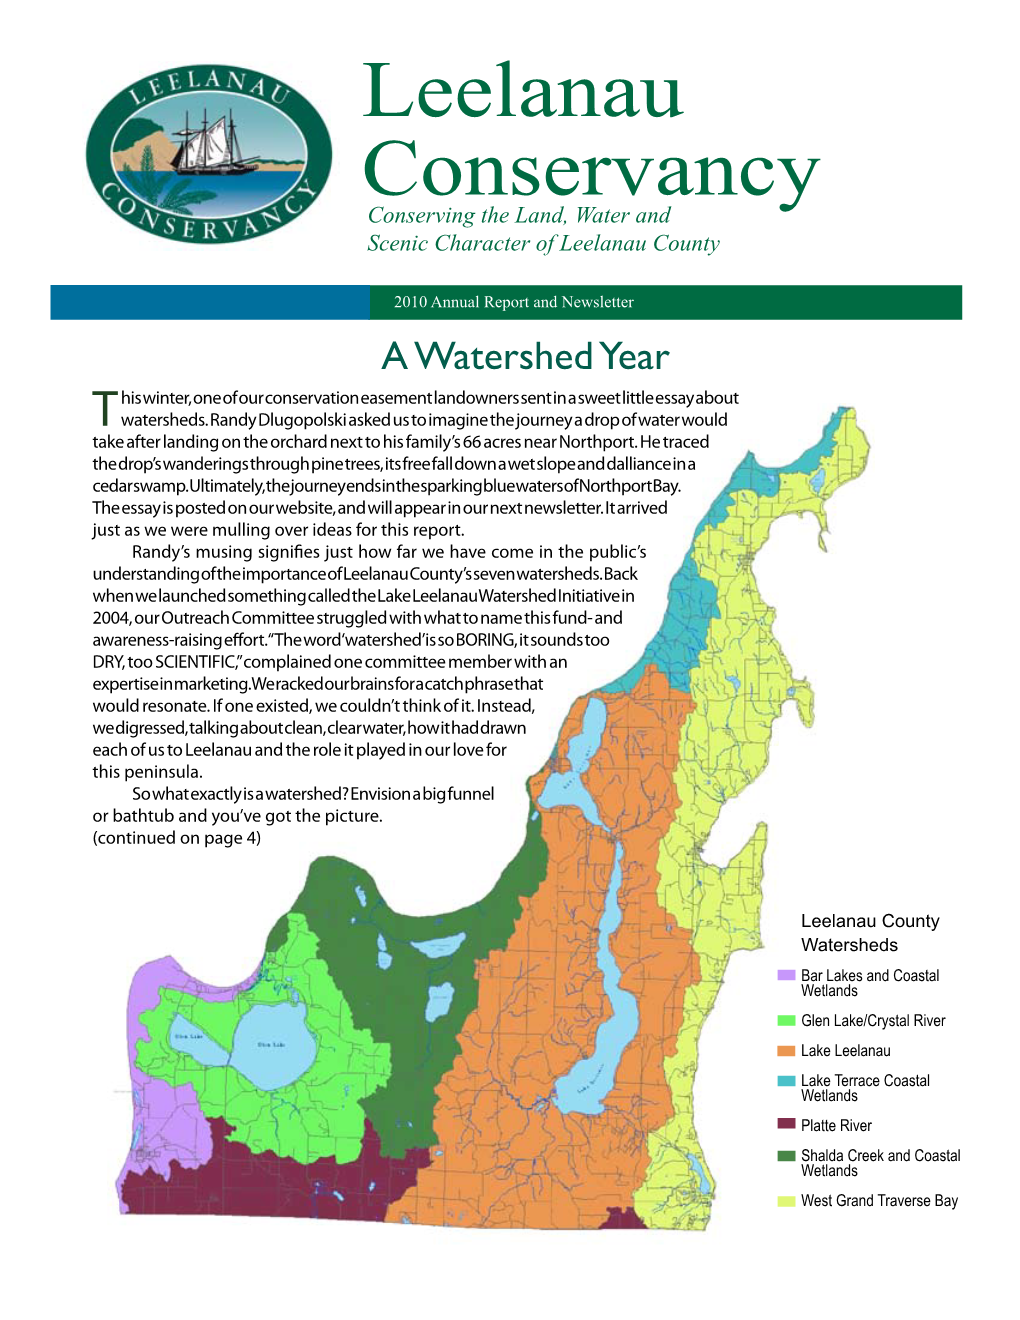 Leelanau Conservancy Conserving the Land, Water and Scenic Character of Leelanau County